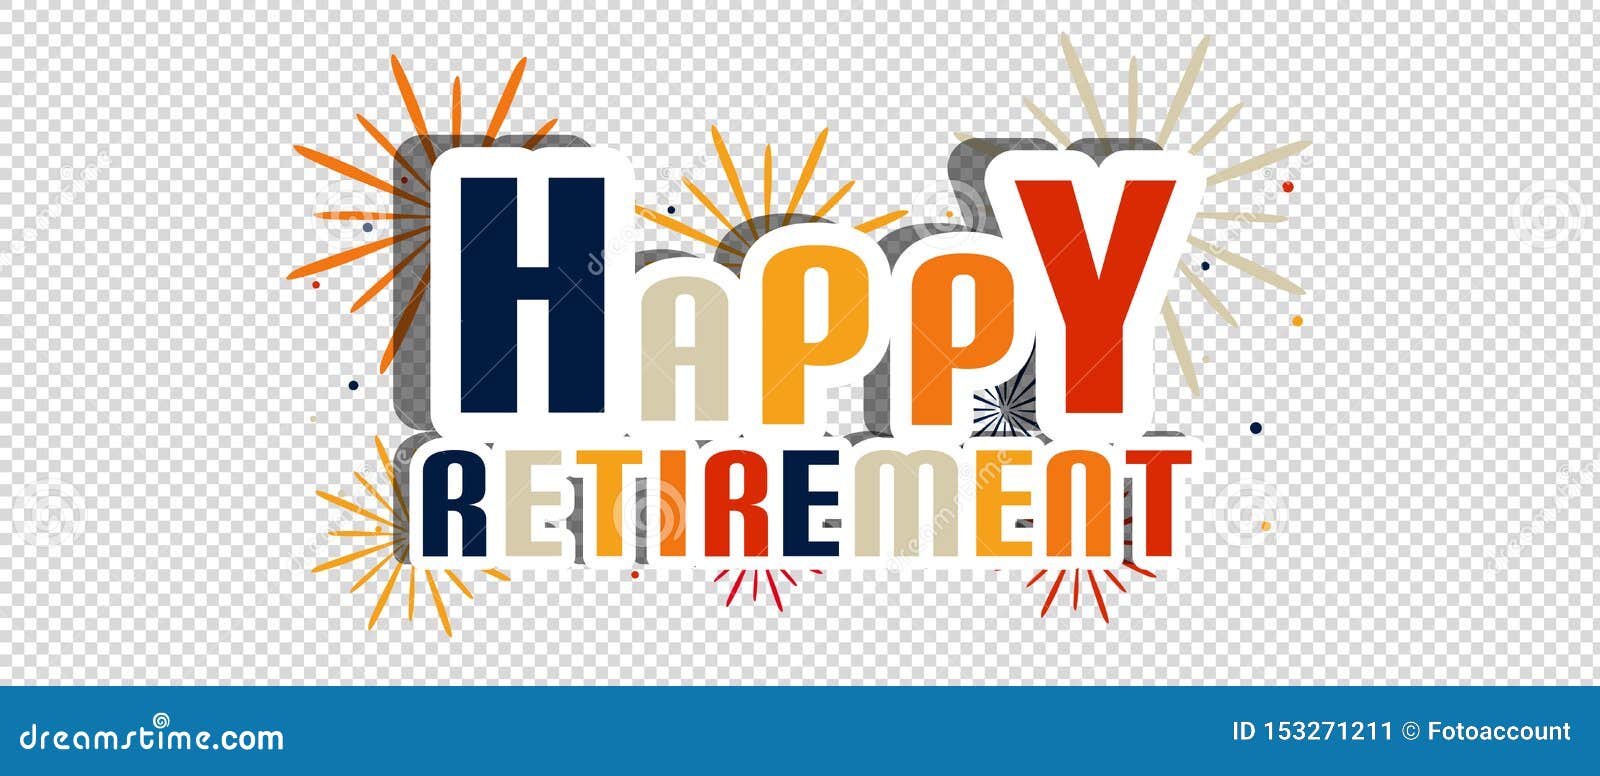 Happy Retirement Letters with Fireworks and Shadow - Vector ...